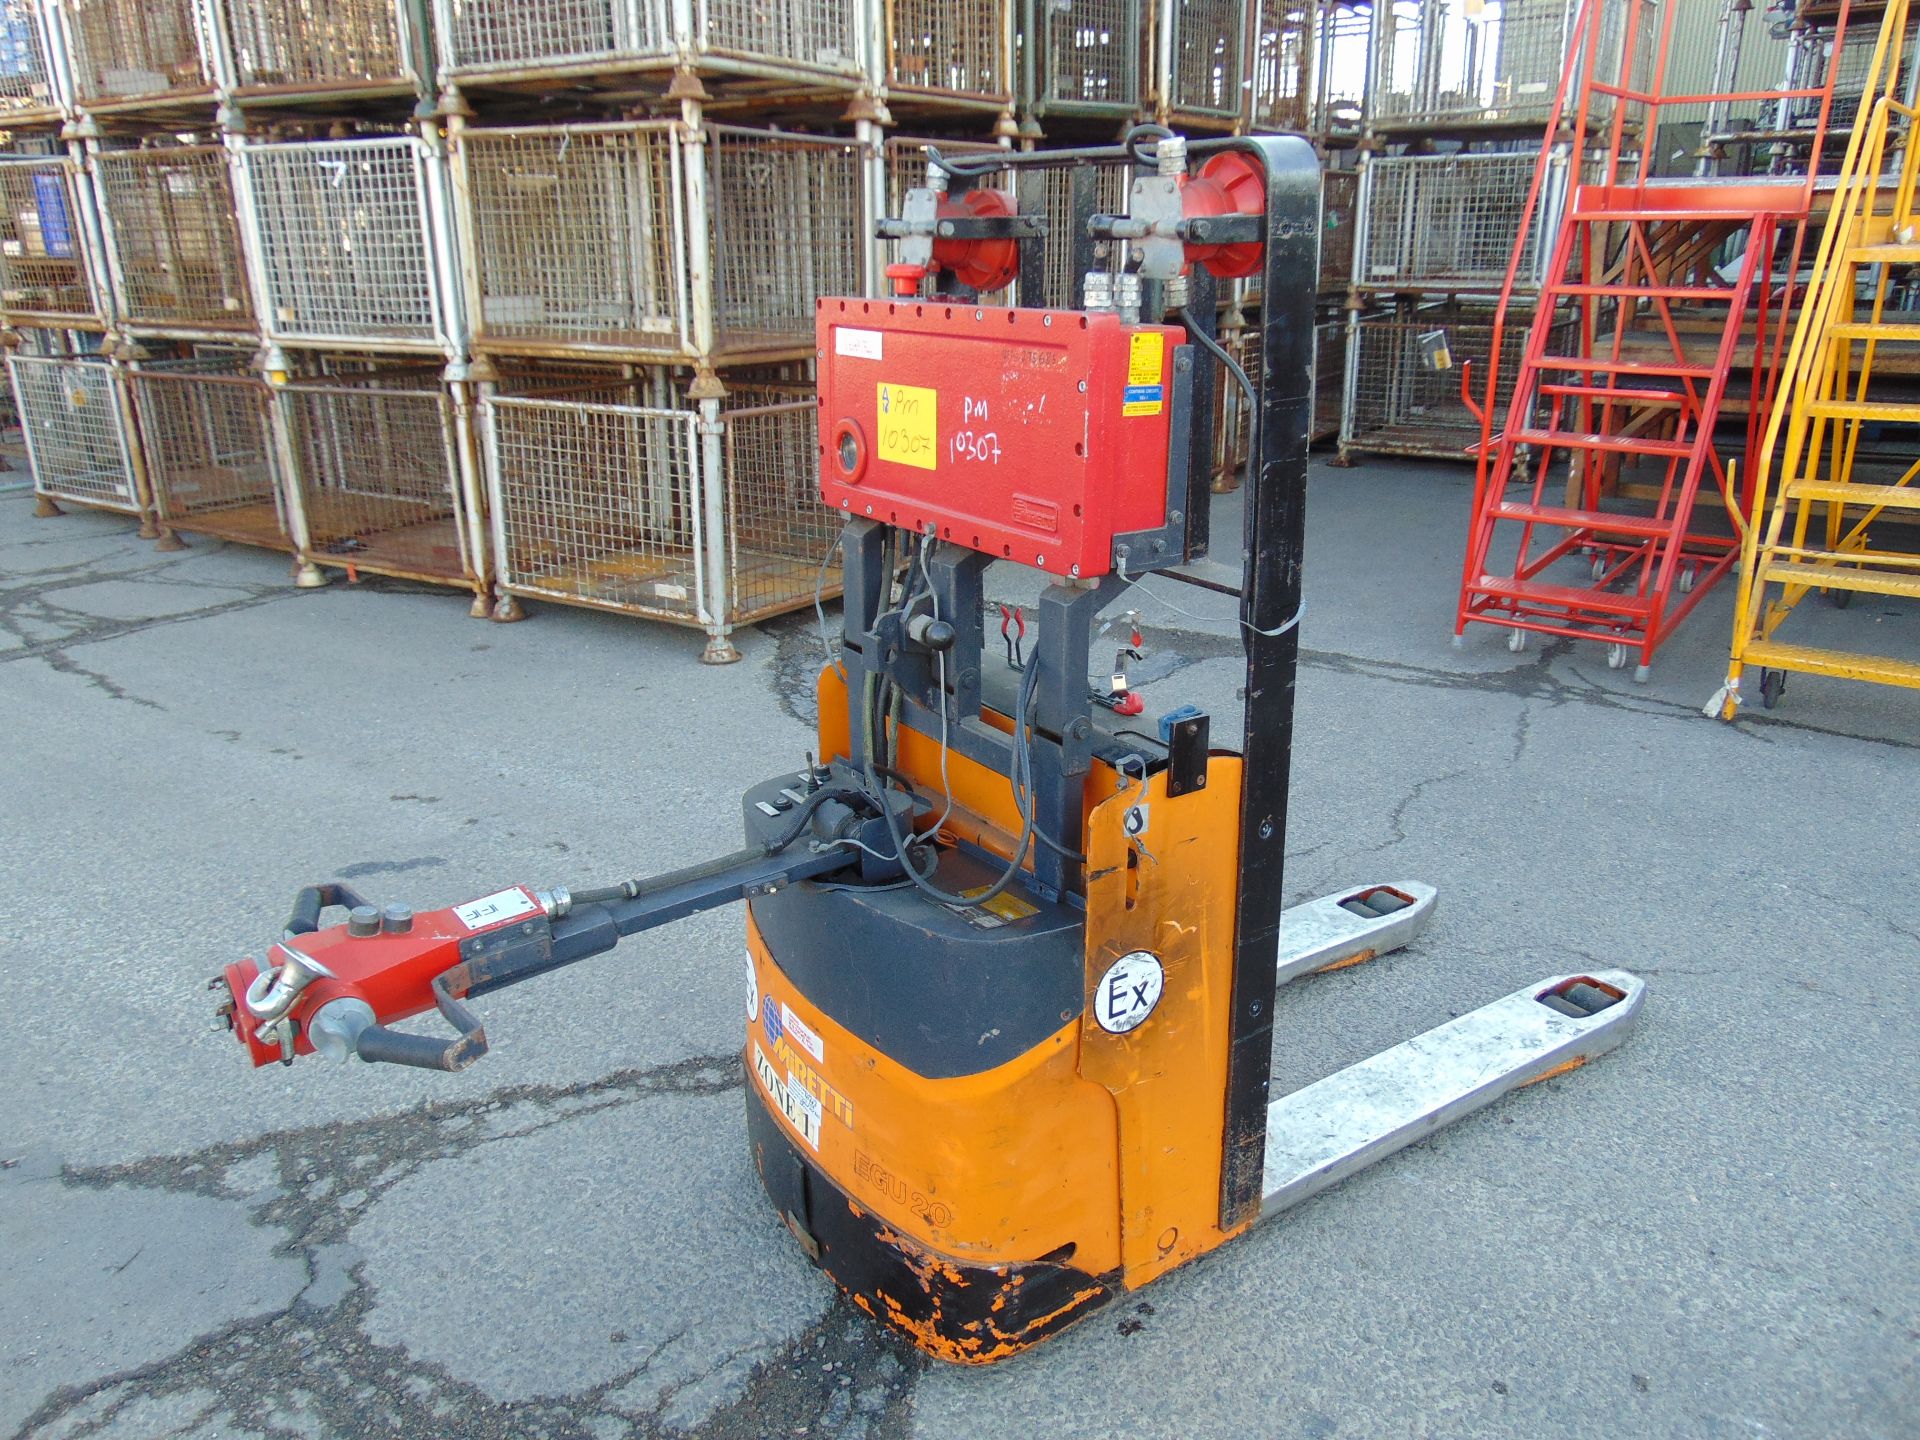 Still EGU 20 Class C, Zone 1 Protected Electric Powered Pallet Truck